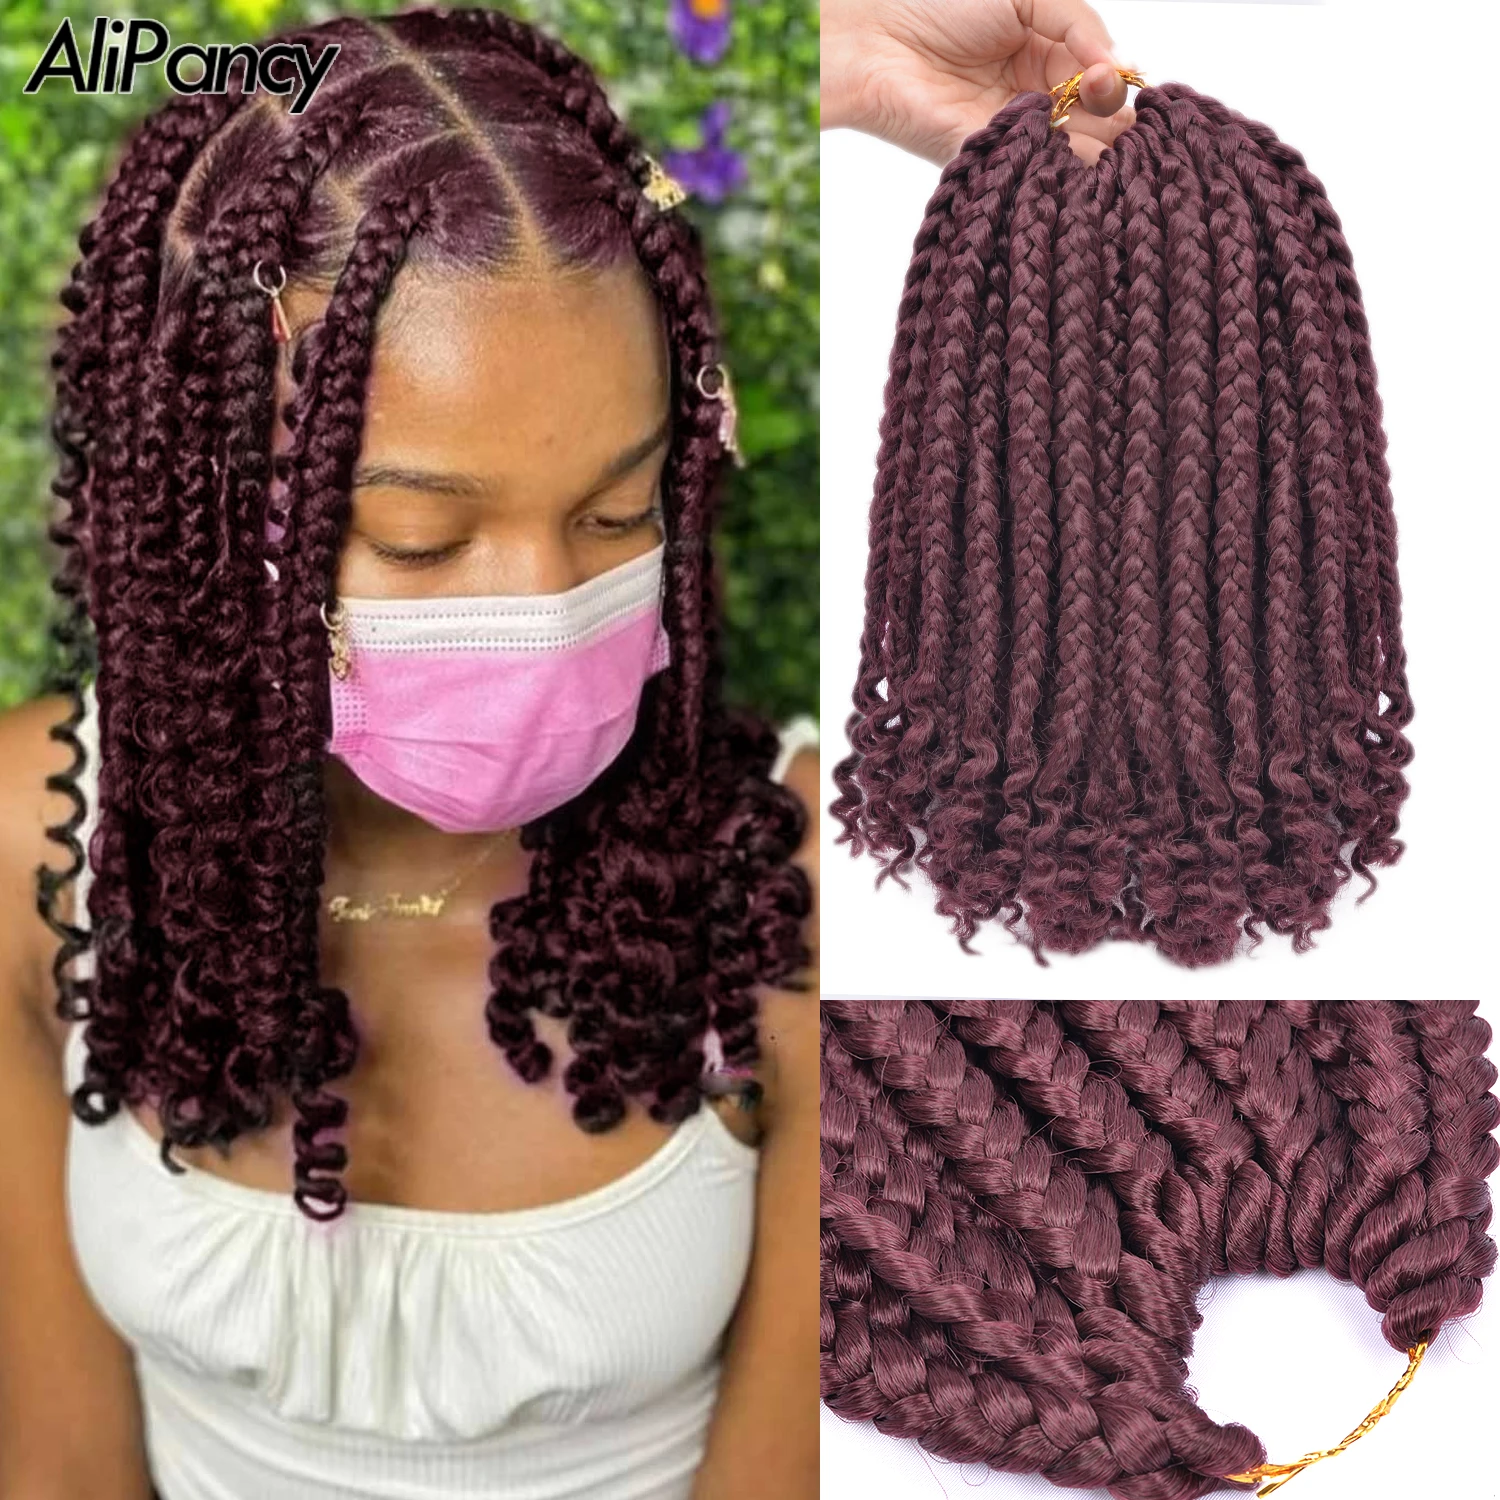 Synthetic 10 Inch Bob Box Braid Crochet Hair with Curly Ends Crochet Box Braids for Kids Hair for Black Women Extension